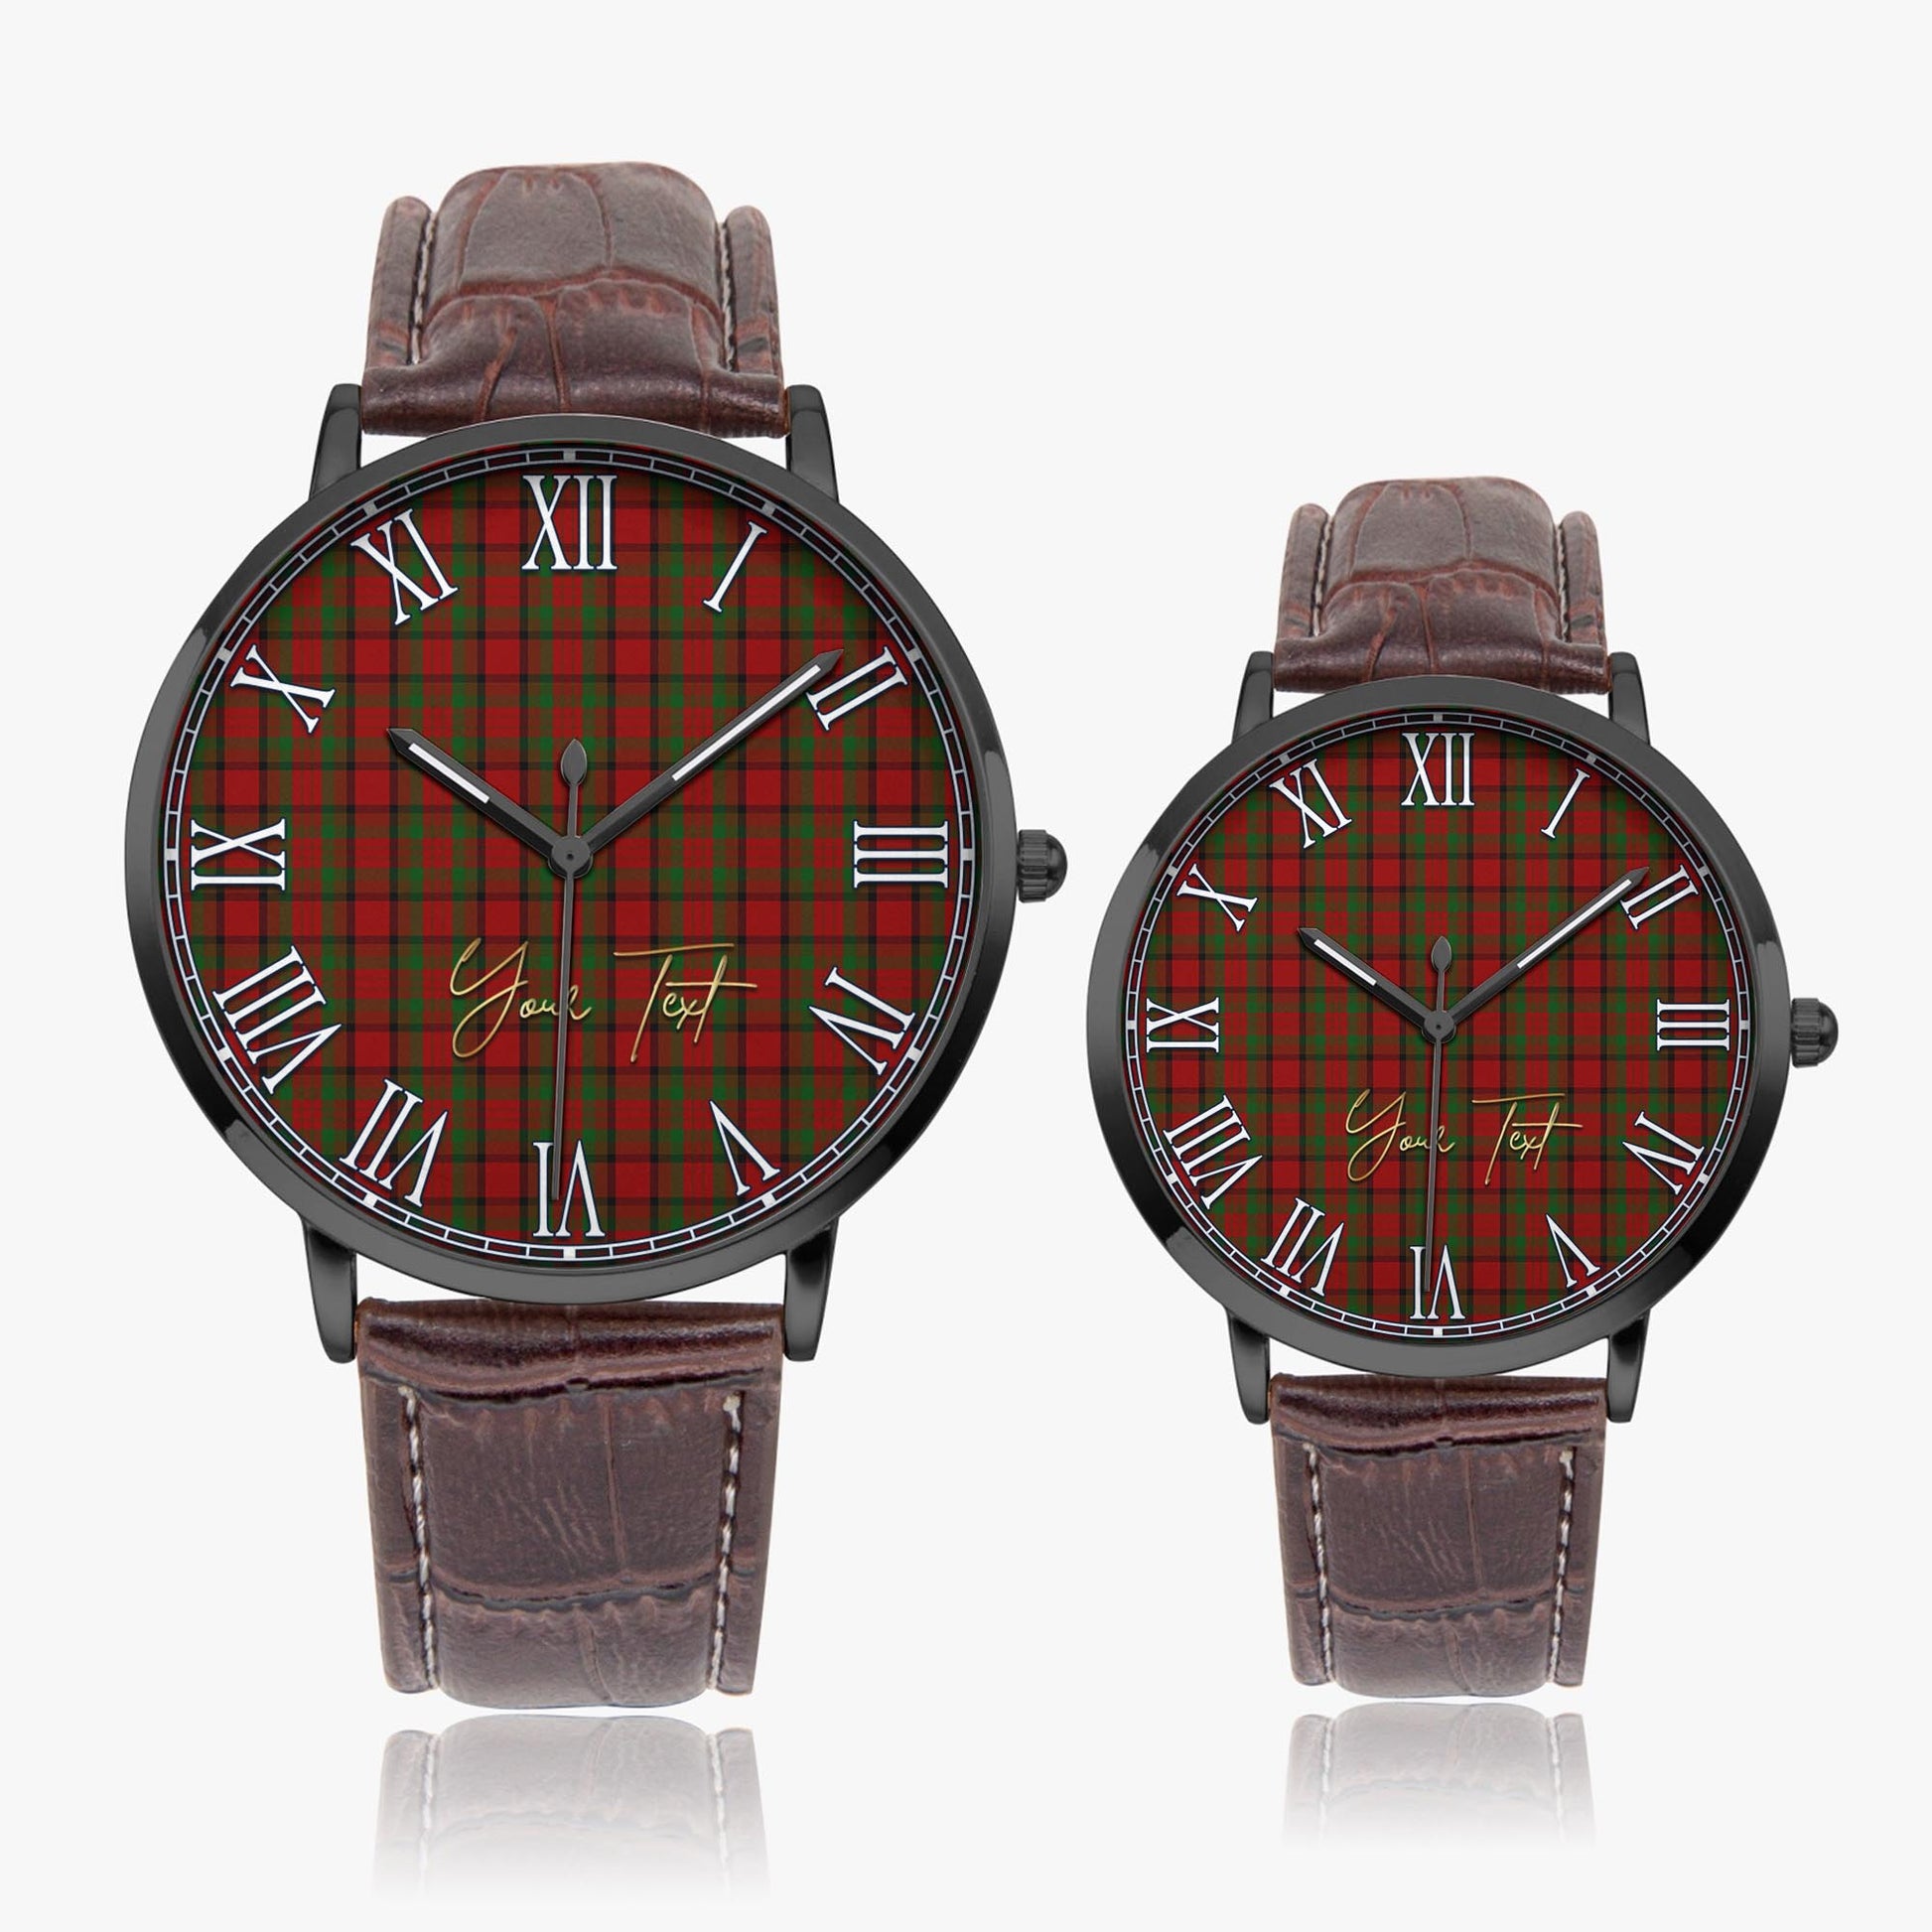 Tipperary County Ireland Tartan Personalized Your Text Leather Trap Quartz Watch Ultra Thin Black Case With Brown Leather Strap - Tartanvibesclothing Shop